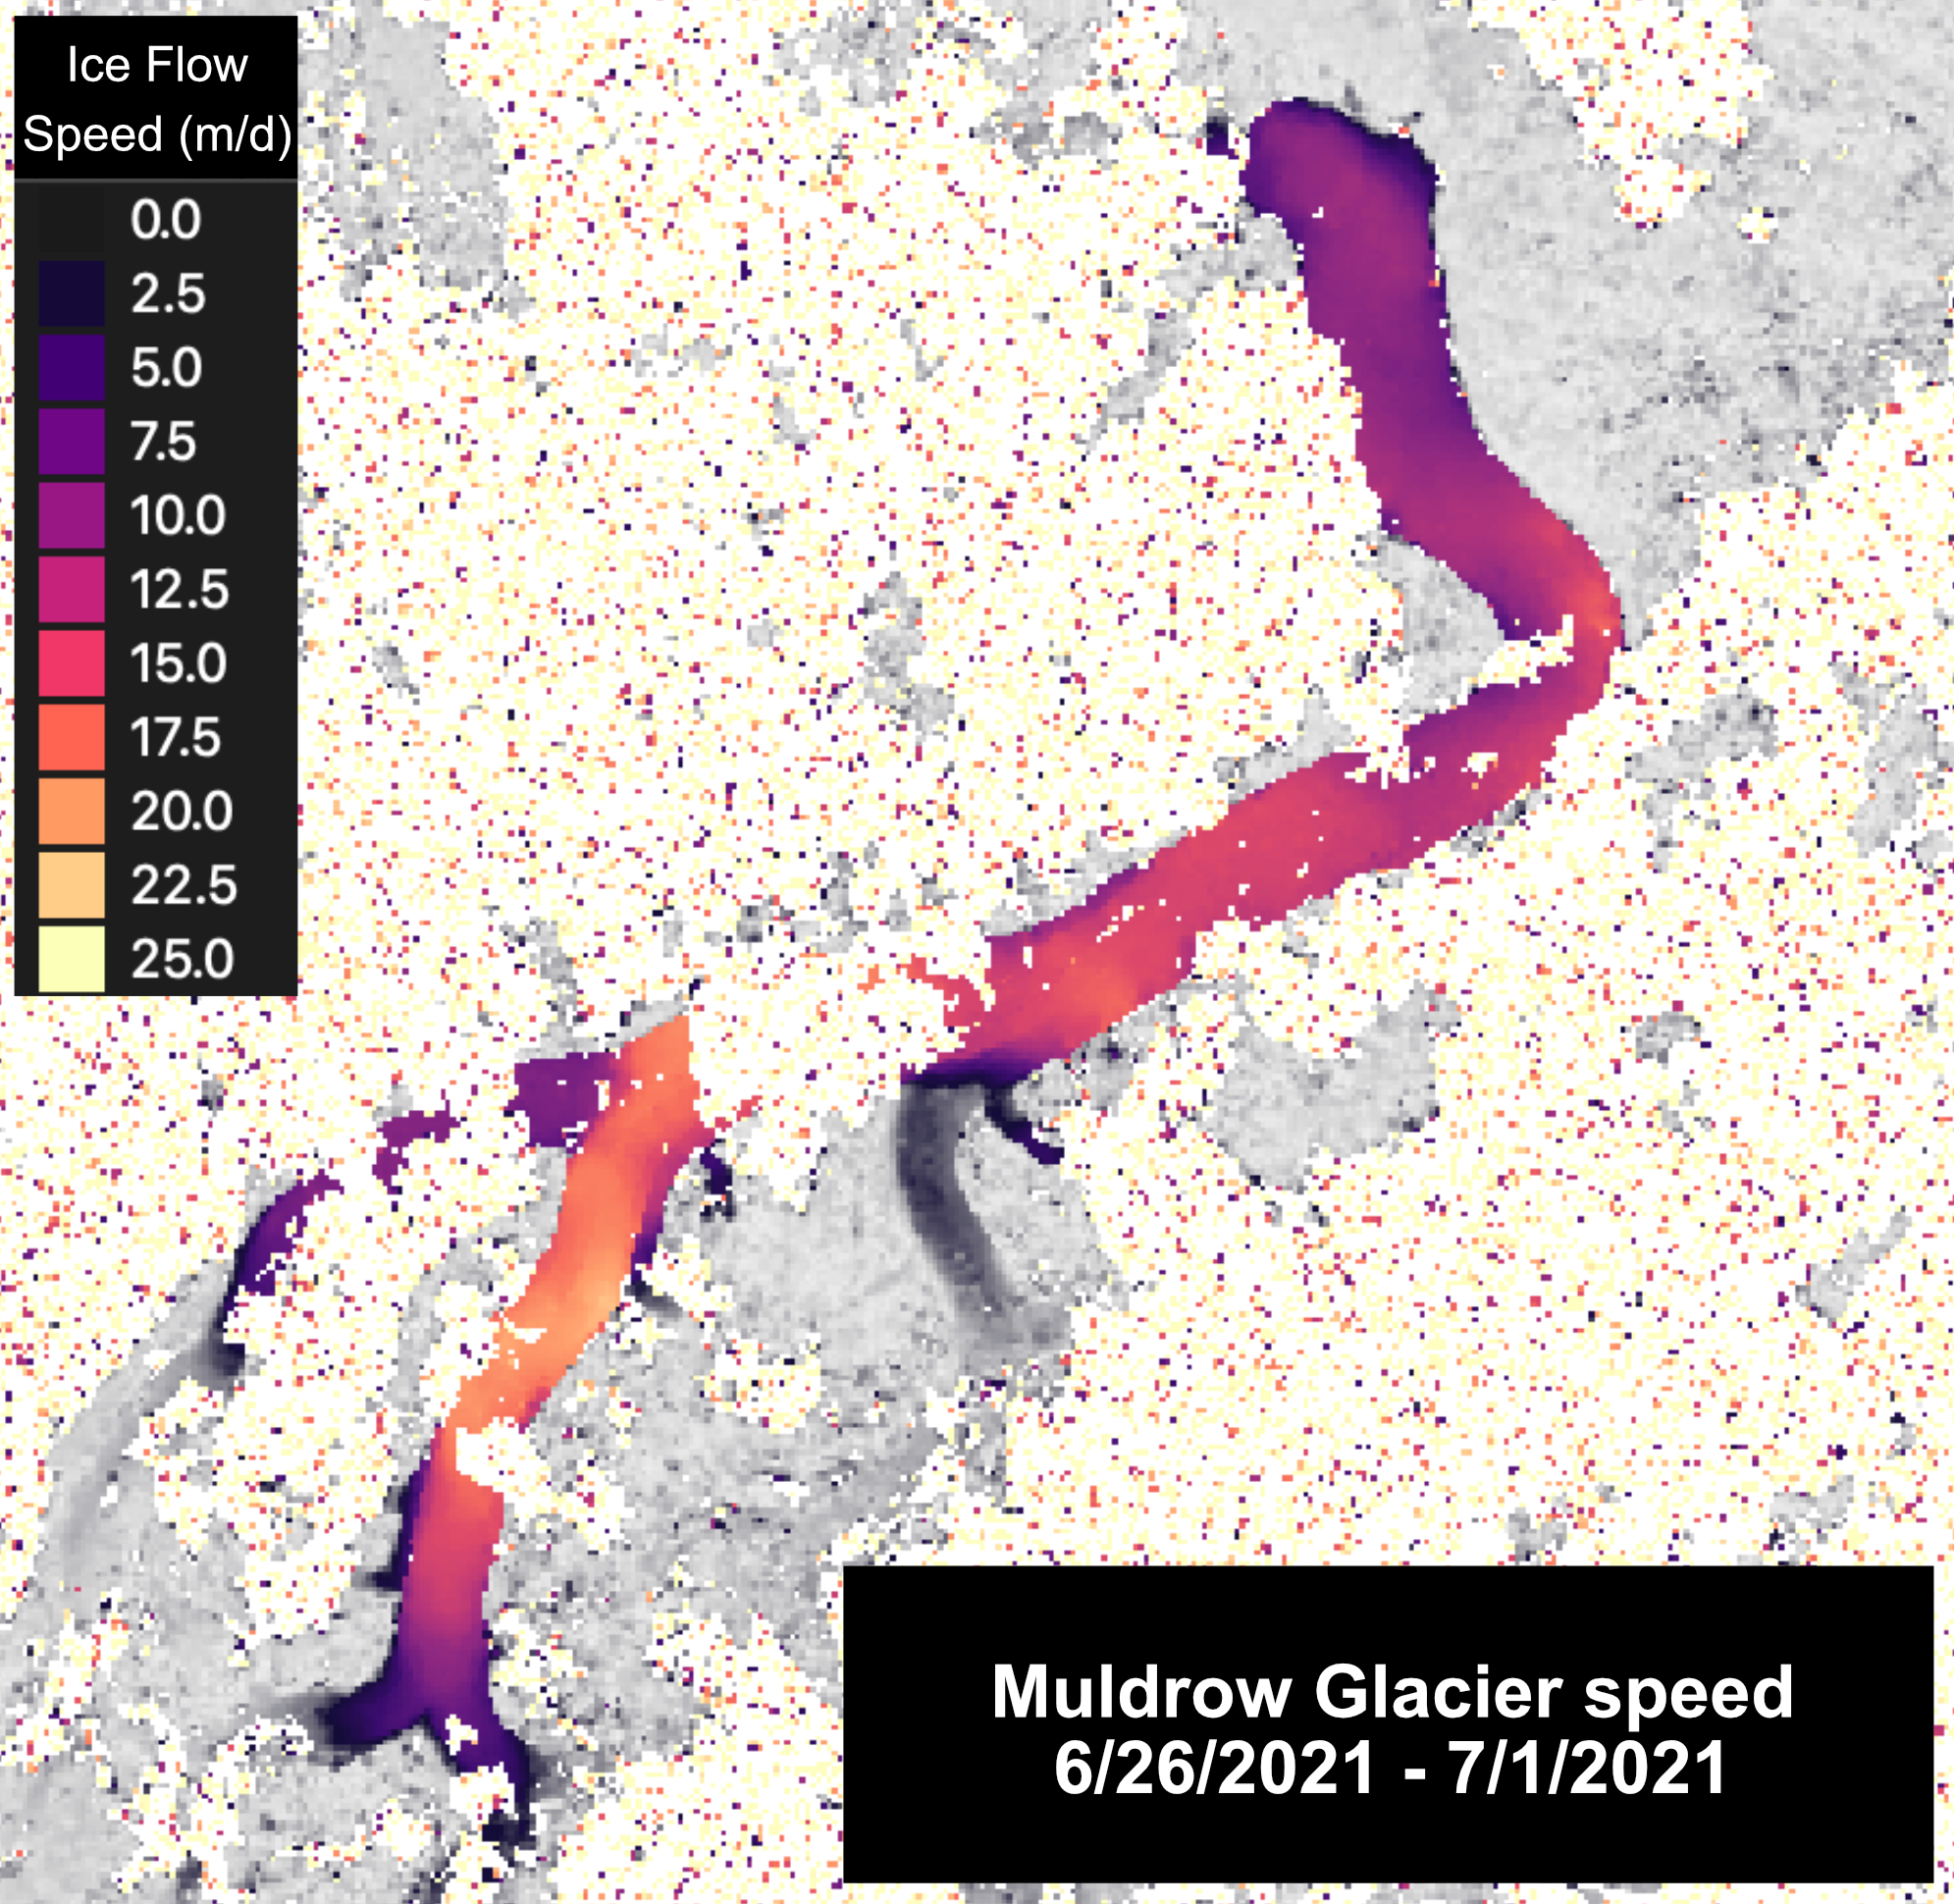 satellite image of a glacier with color scale illustrating relative movement